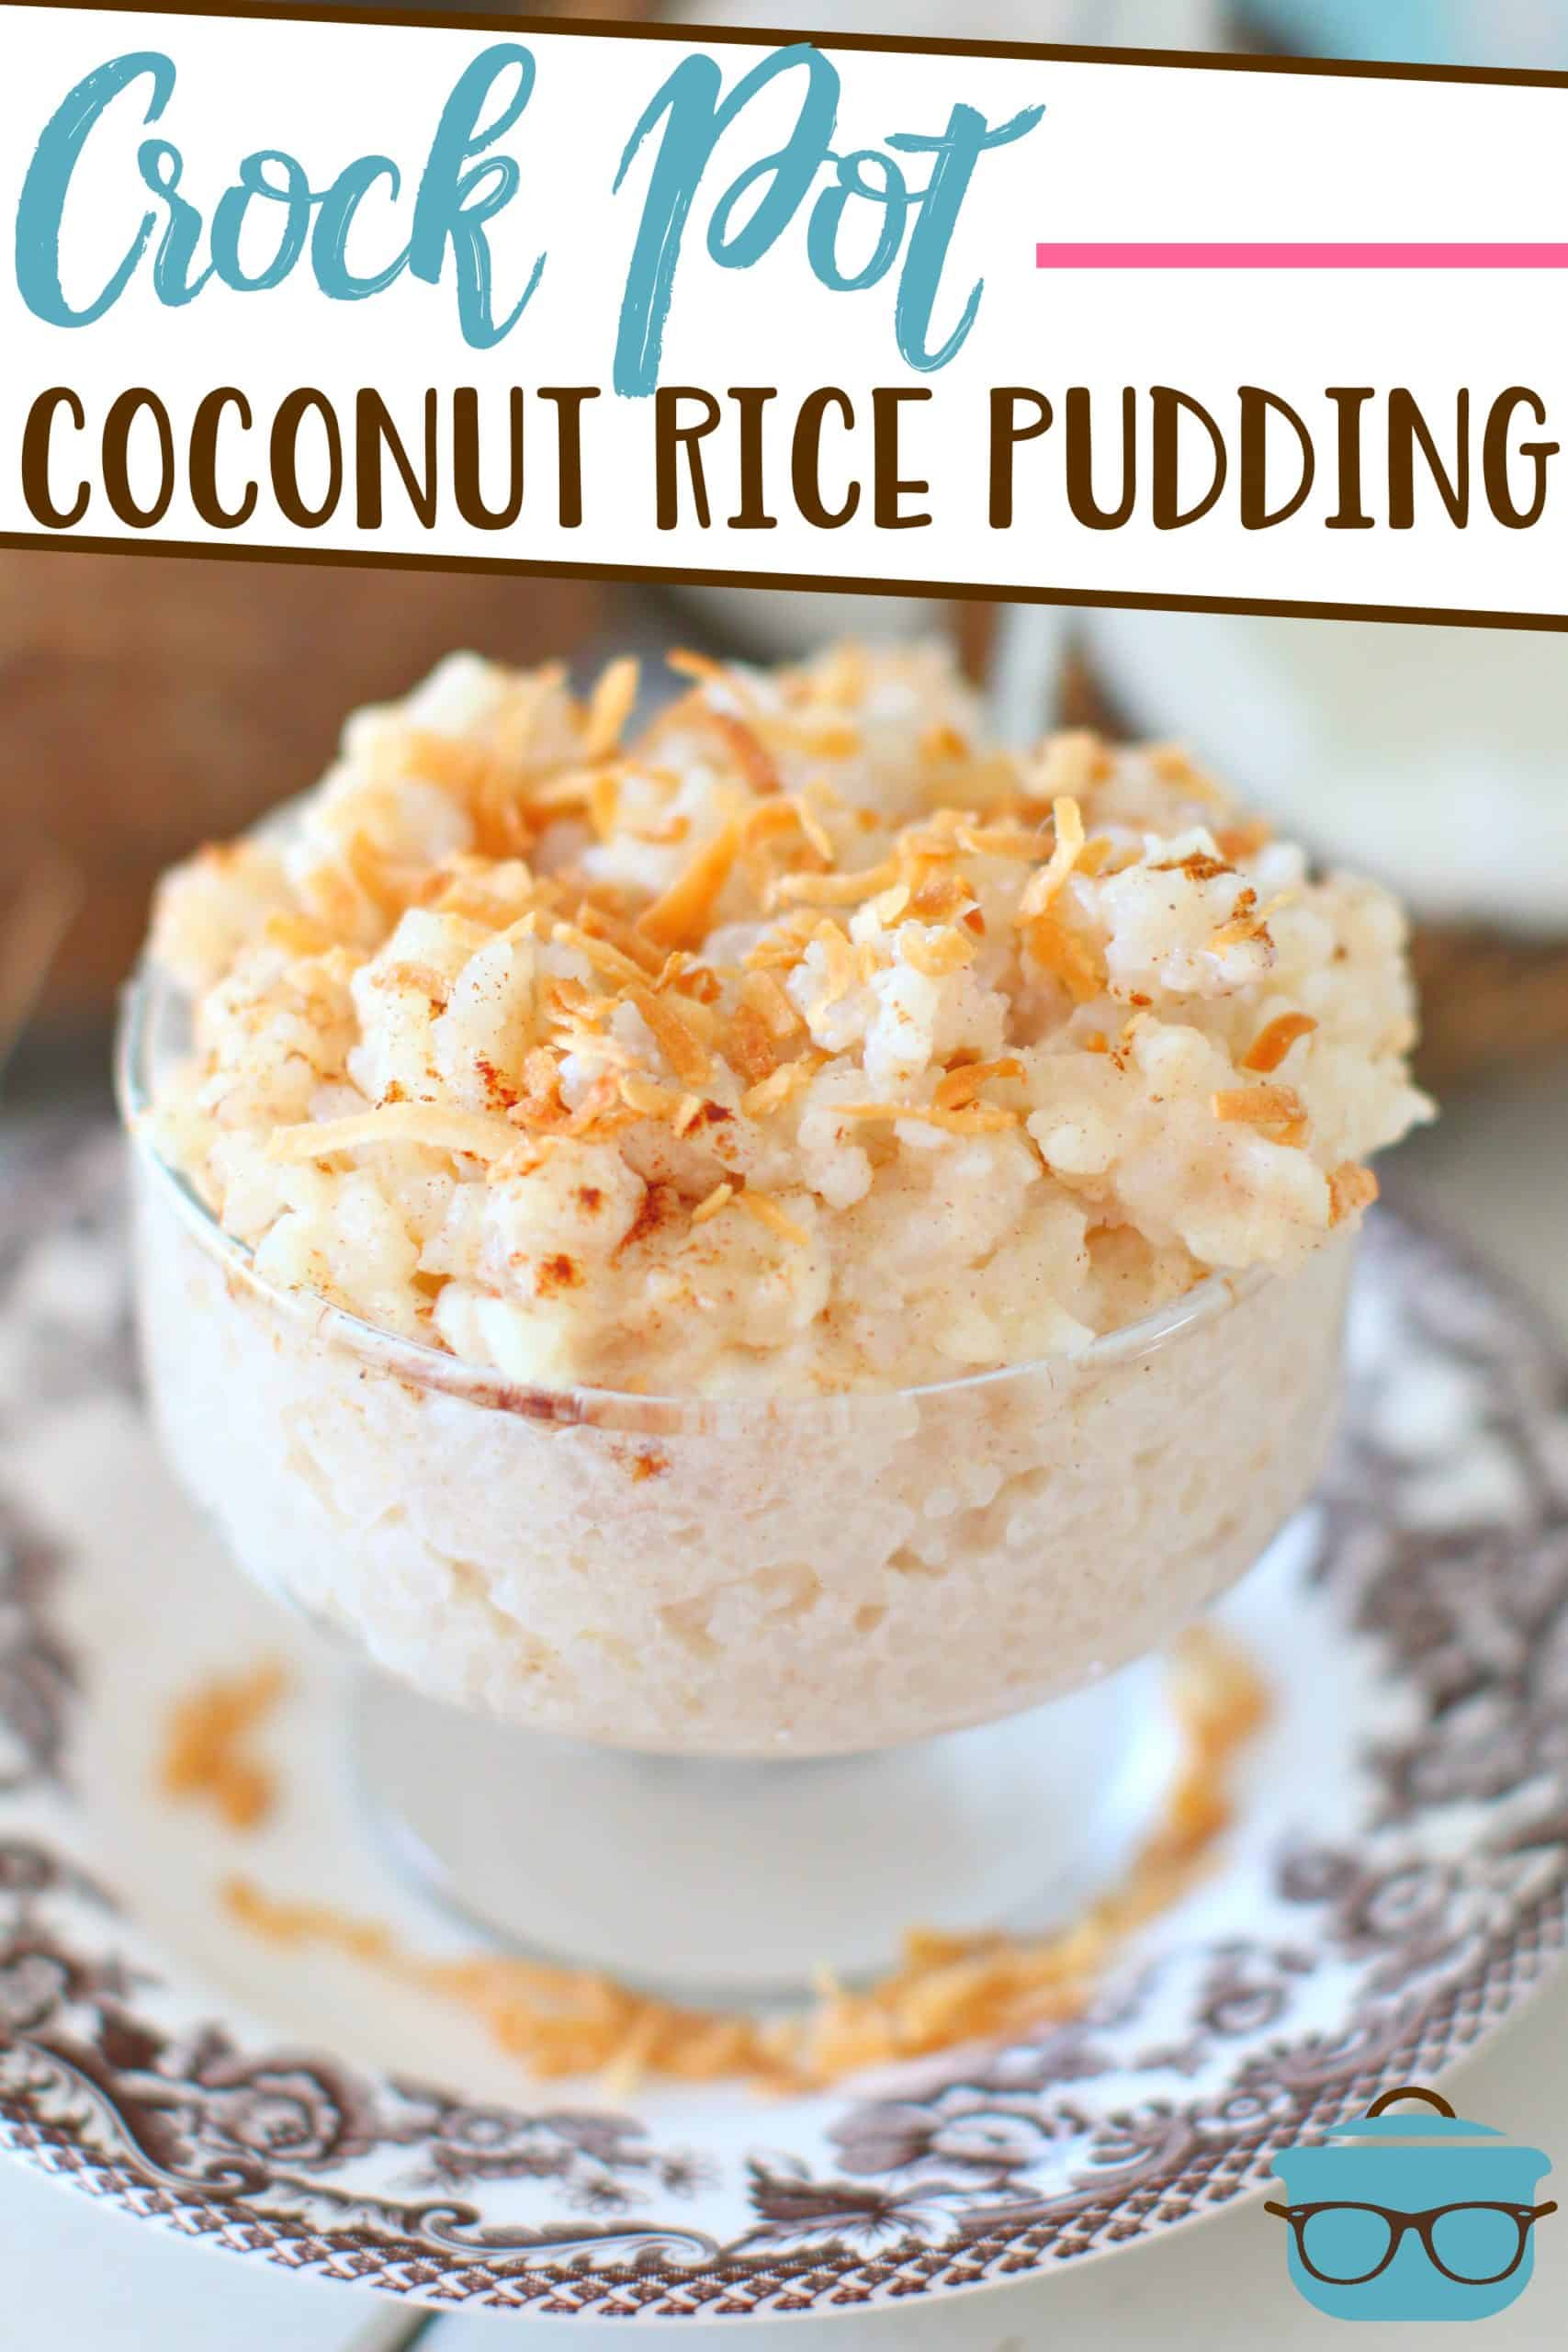 Coconut Rice Pudding pictured in a clear ice cream dish and topped with toasted flaked coconut.